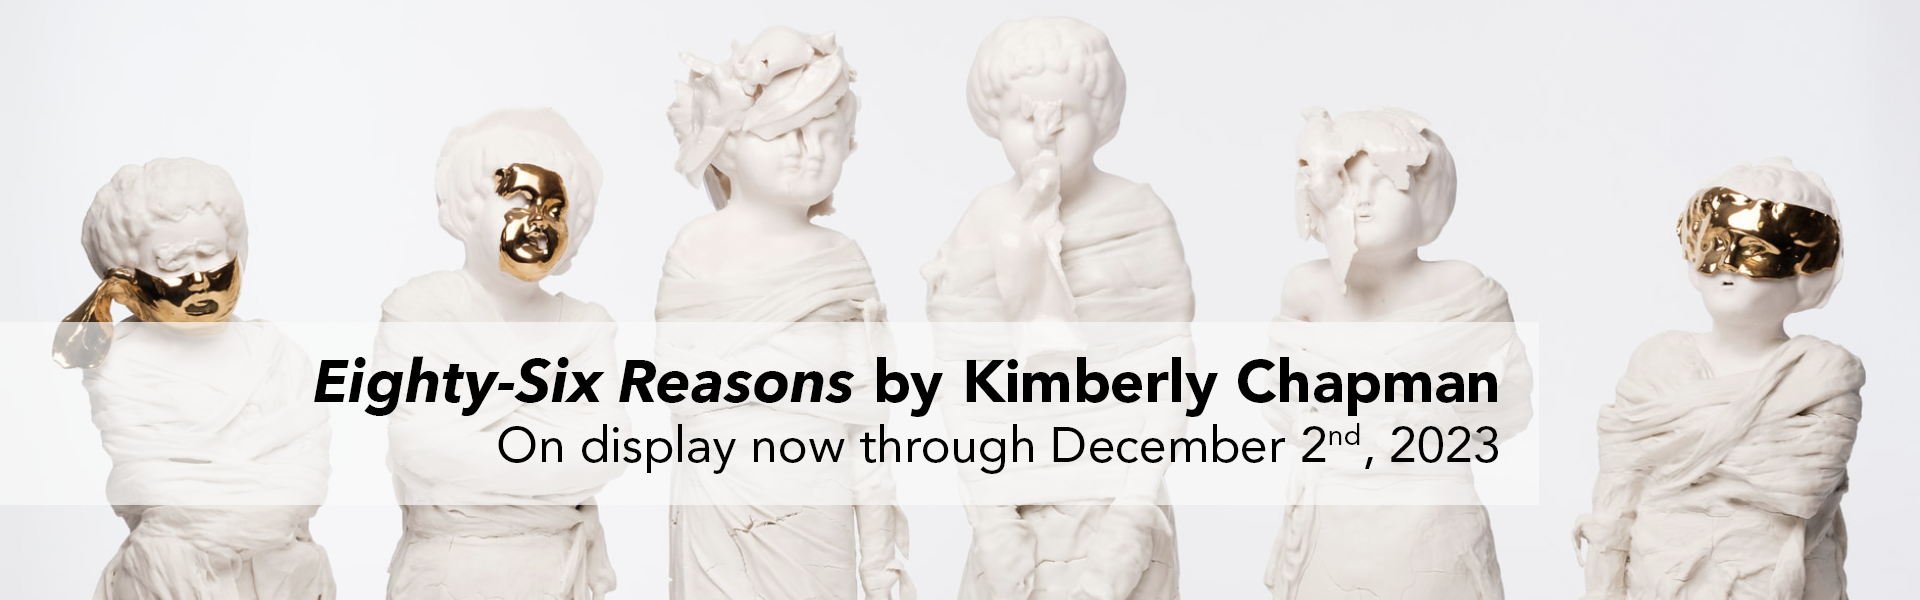 86 Reasons by Kimberly Chapman, new exhibit opens August 1, 2023